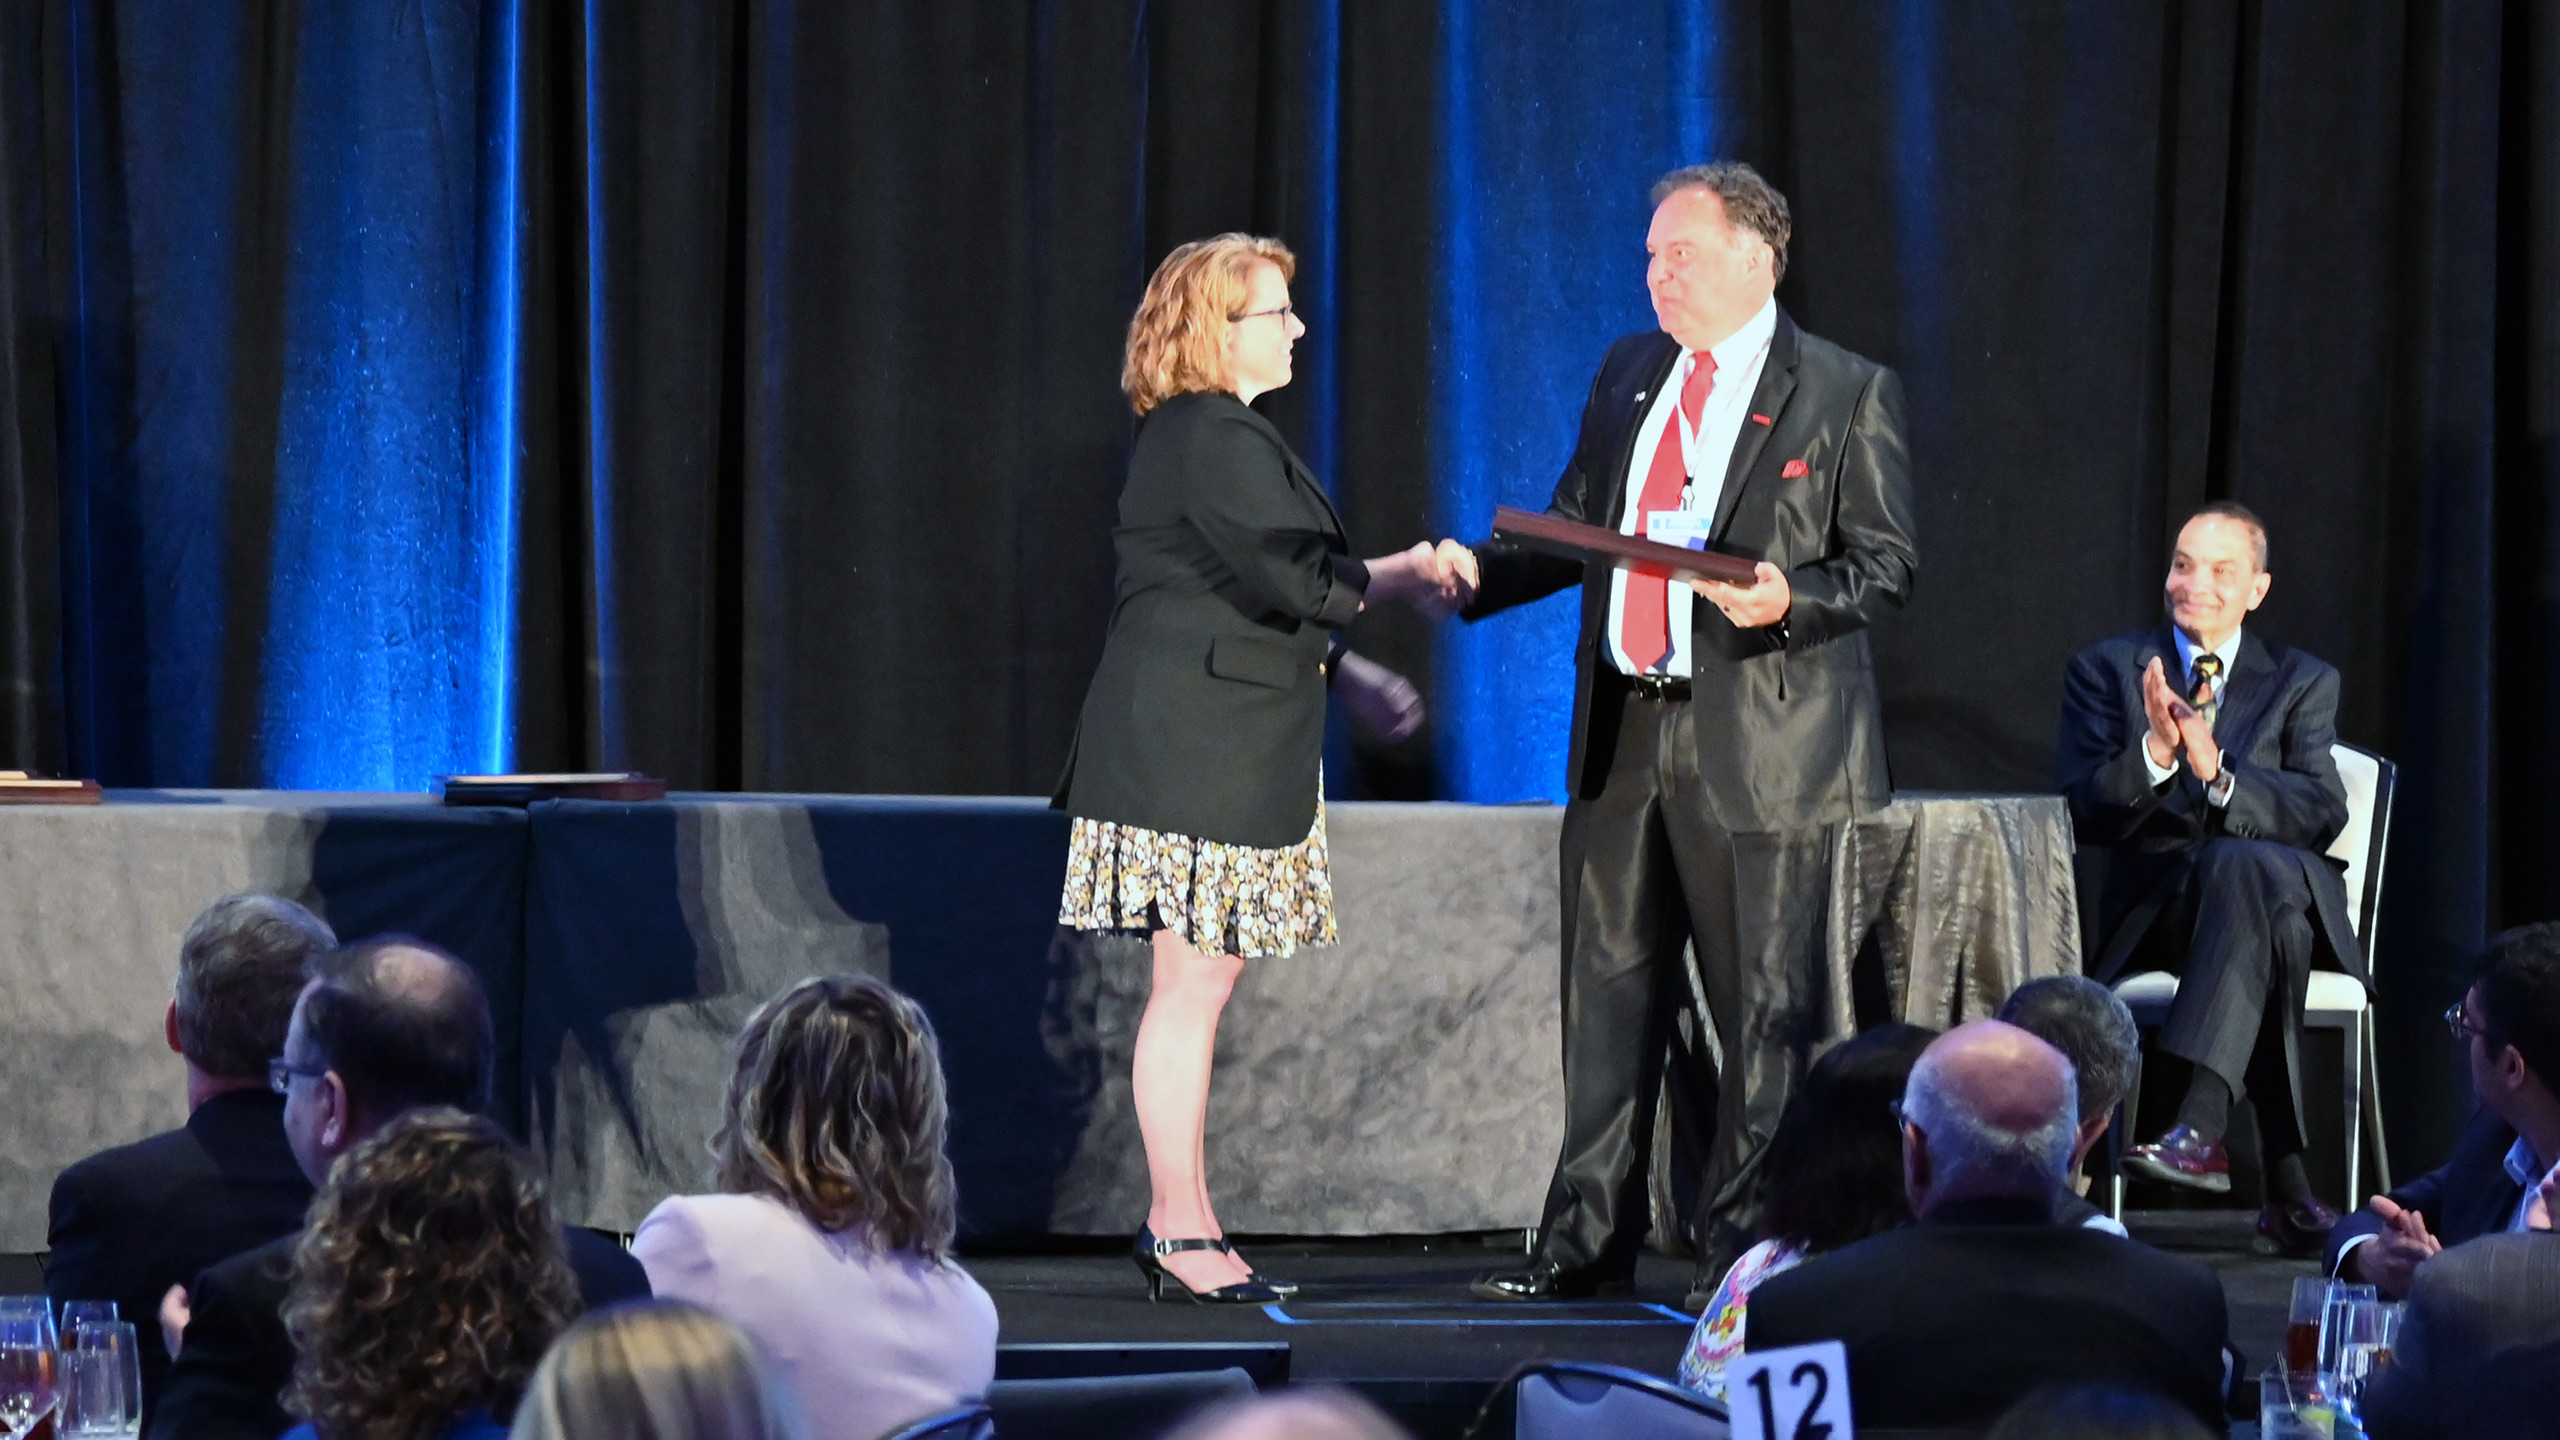 Tony Blevins shakes hands with the IISE president-elect as he receives her Captains of Industry Award